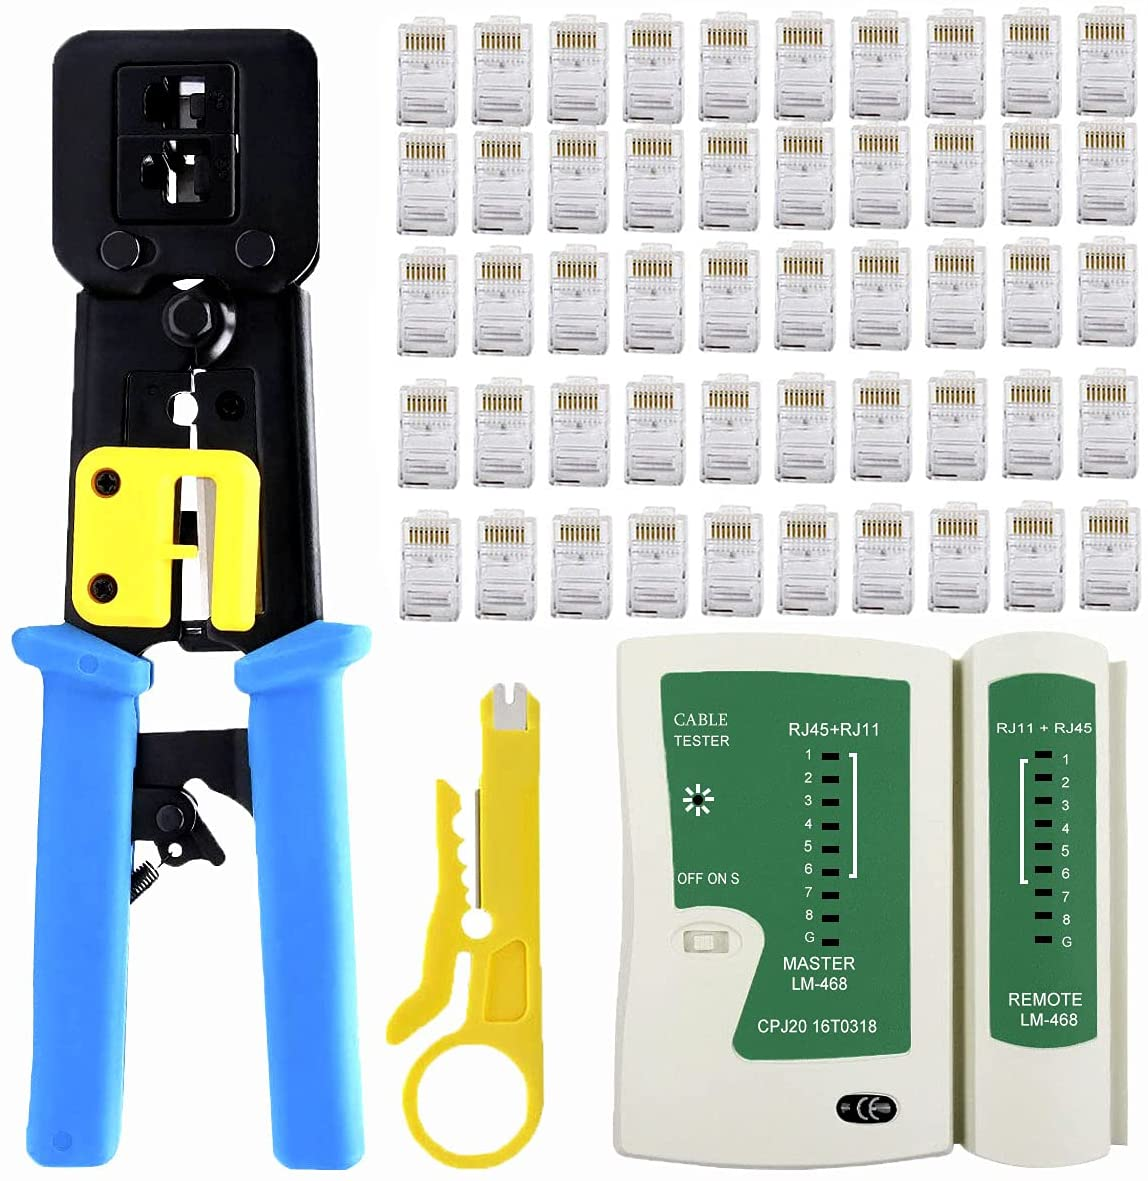 RJ45 Crimp Tool Kit Pass Through,Delgada Cat5 Cat5E Cat6 Crimping Tool for RJ45/RJ12 Regular and End-Pass-Through Connectors,With Cable Tester and Network Wire Stripper,50 Pcs Cat6